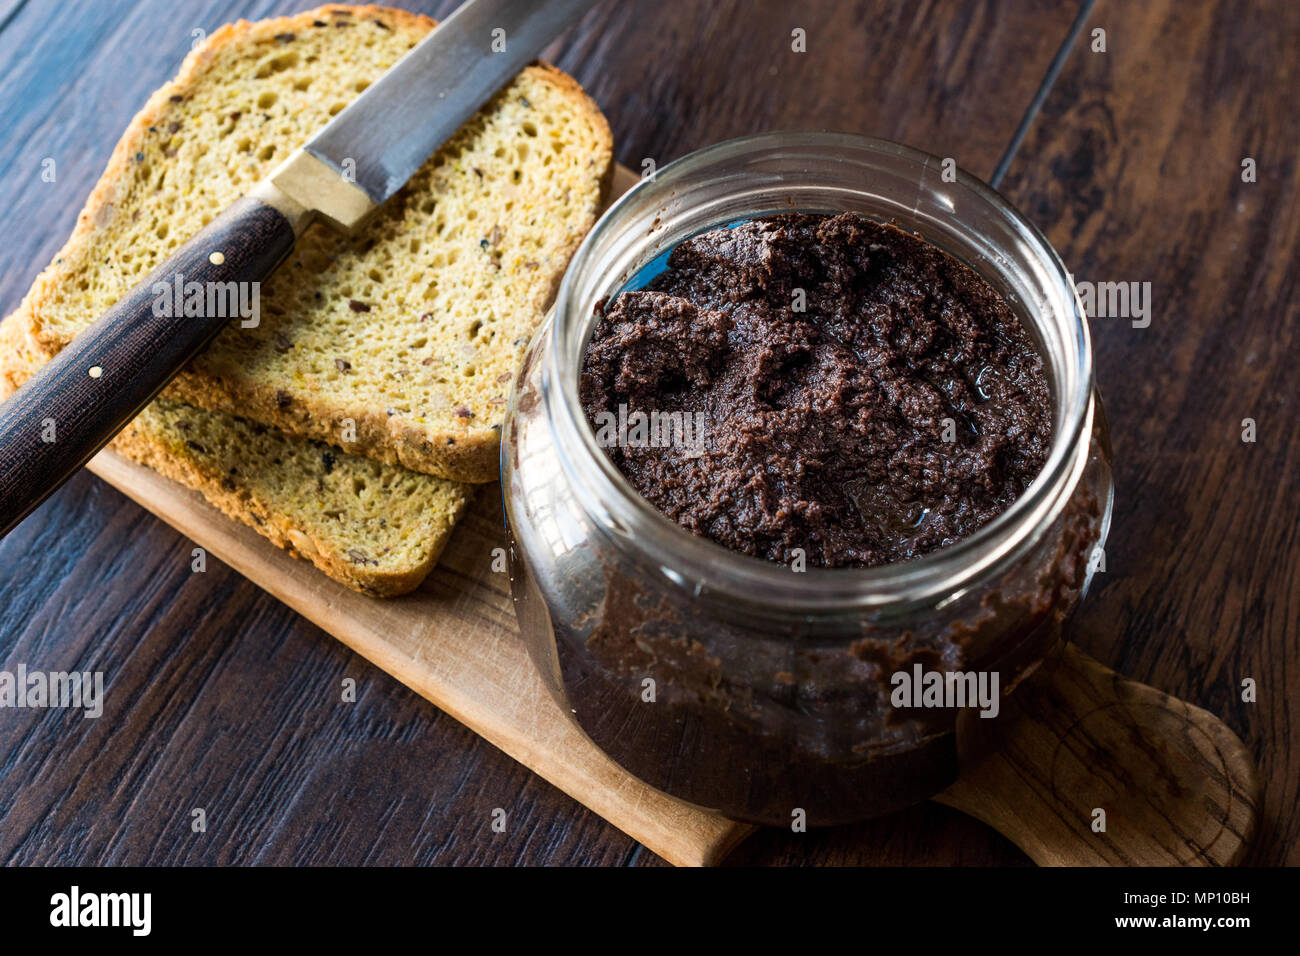 Black Olive Tapenade in Jar with Knife and Bread. Organic Food. Stock Photo